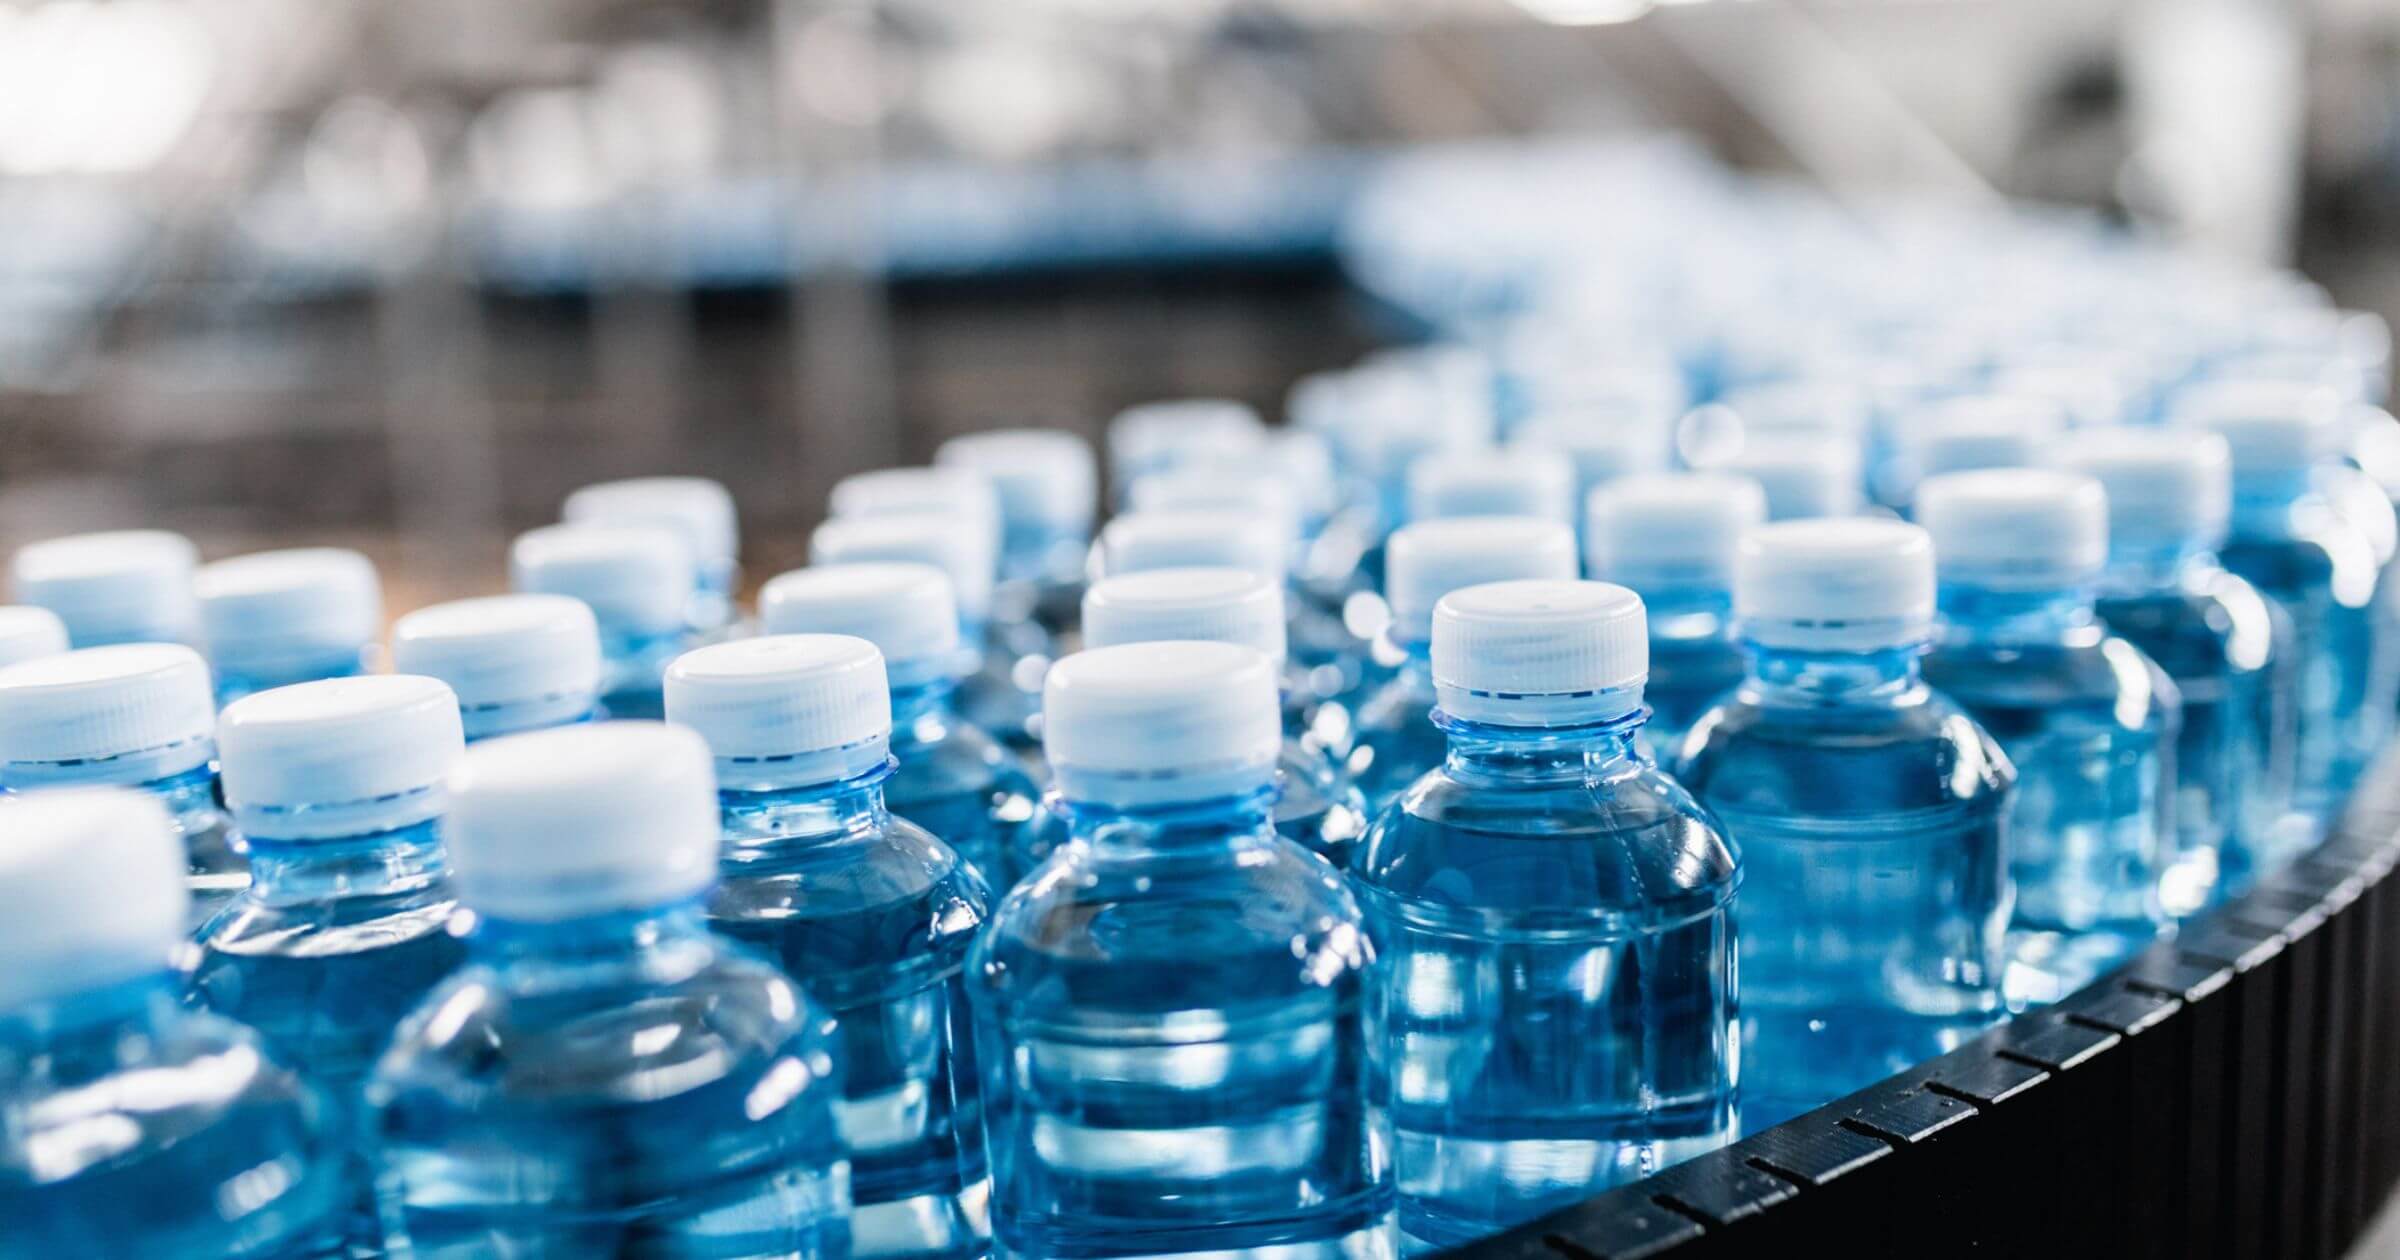 rows of plastic water bottles on a conveyer belt